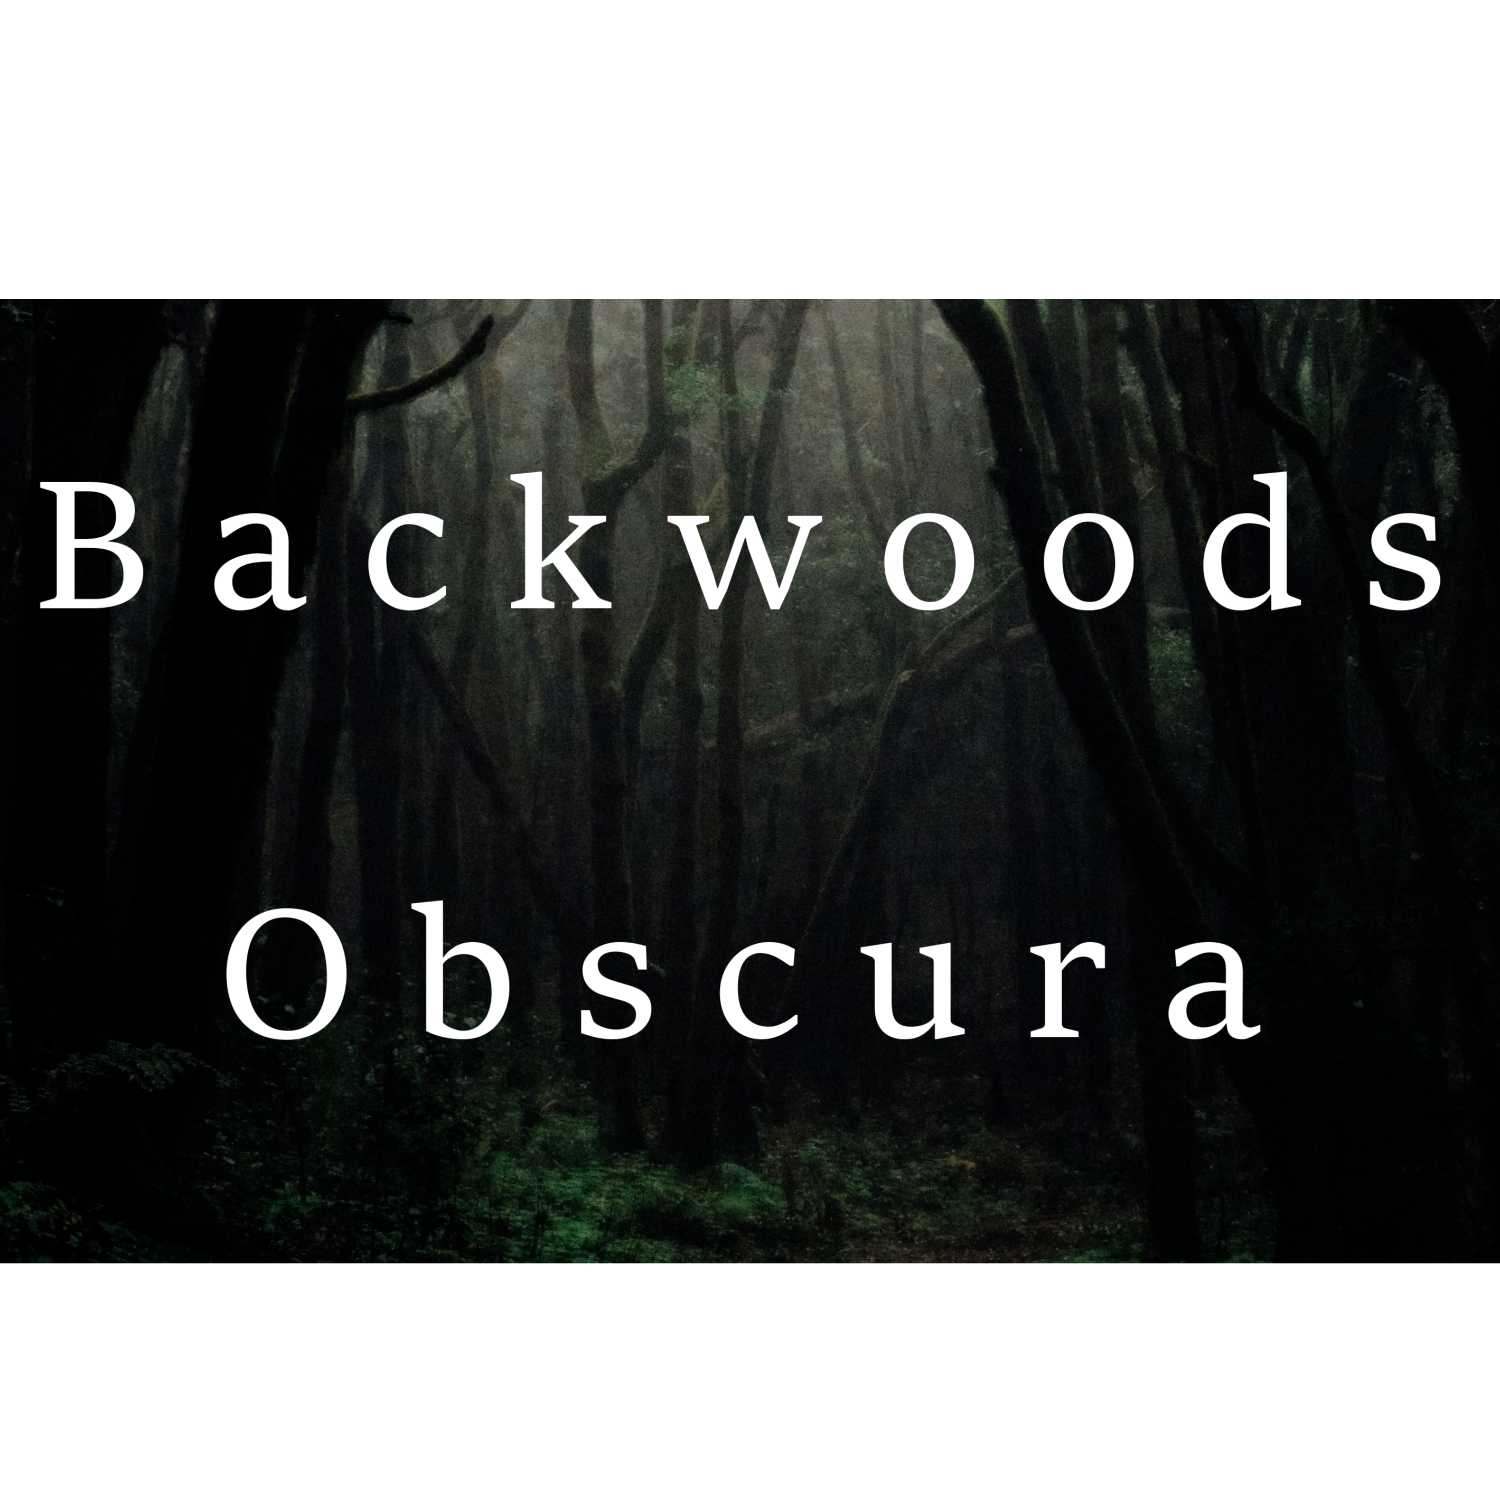 0101 - The Vampire of New Orleans, St. Germain - Backwoods Obscura